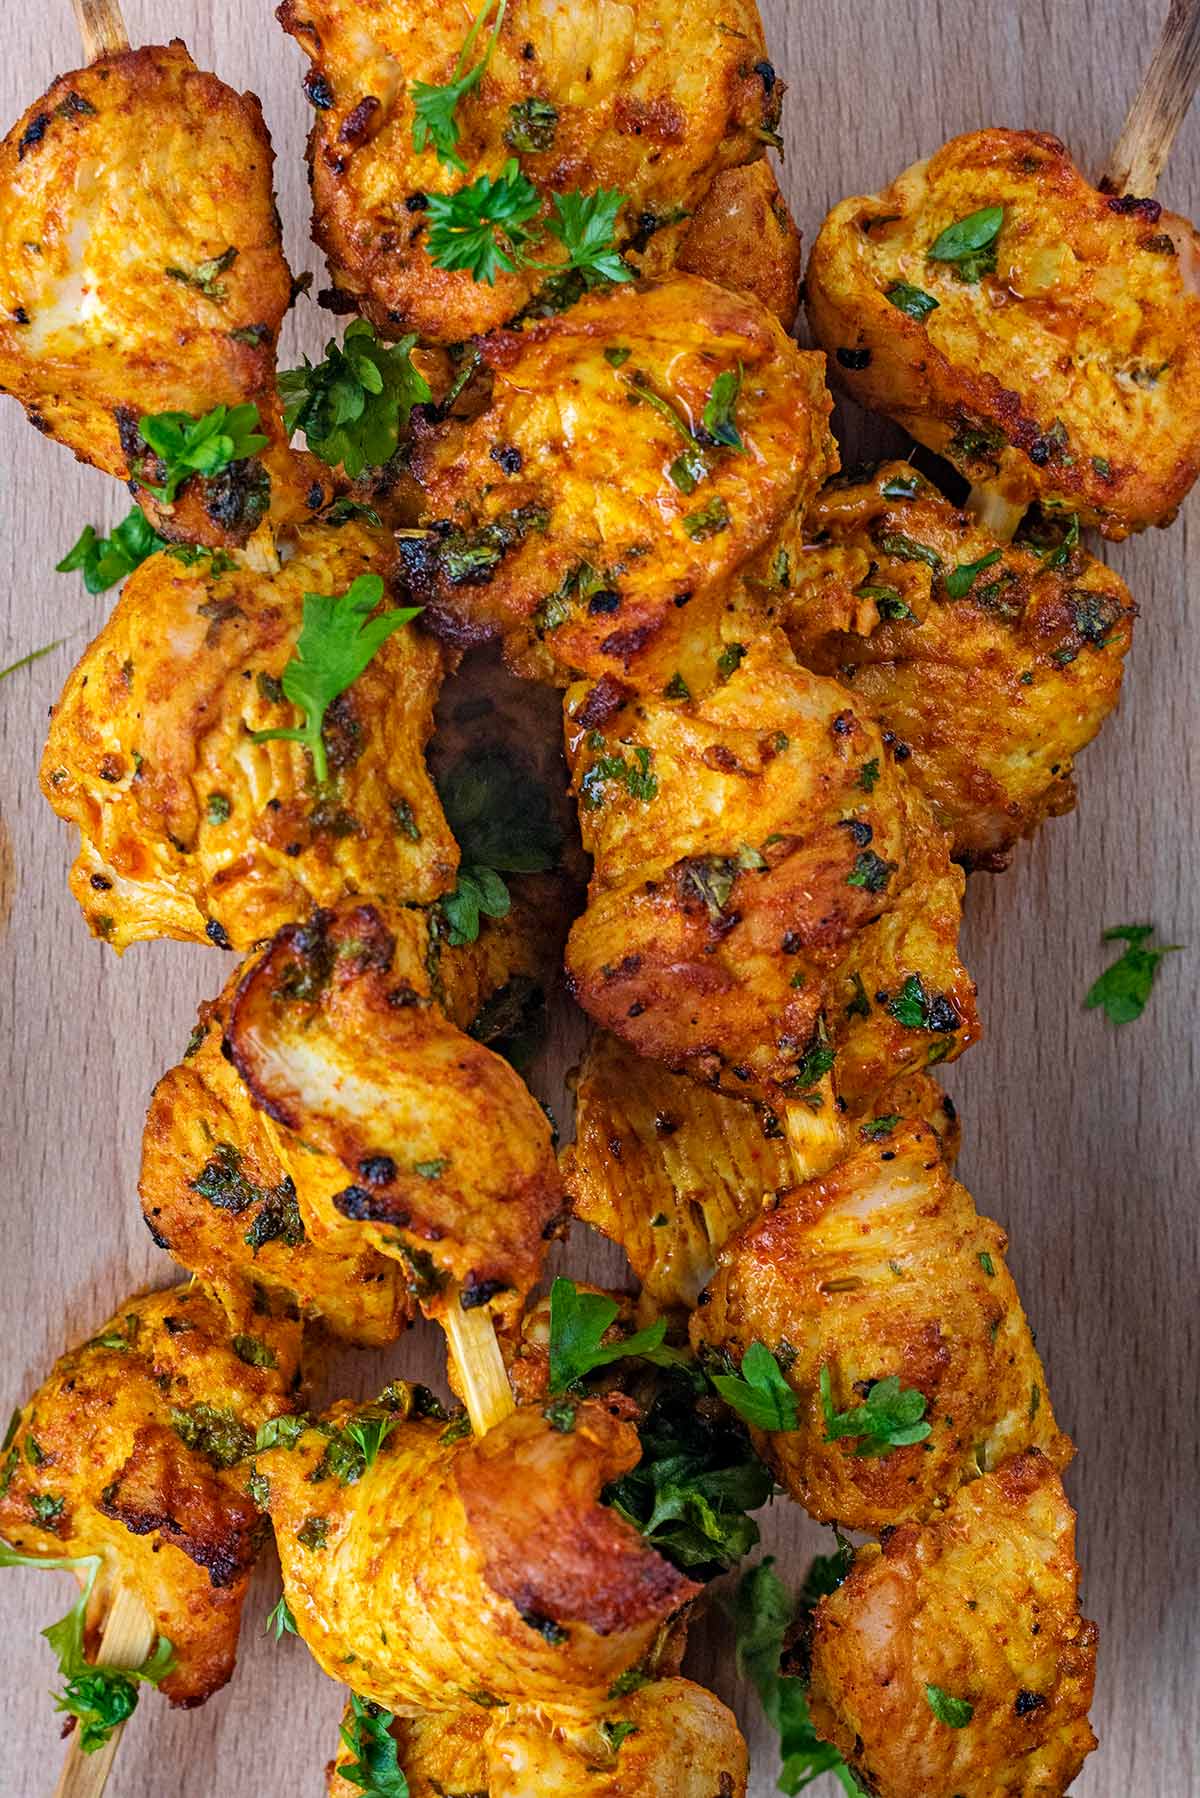 Cooked turkey chunks on skewers with chopped parsley sprinkled over them.